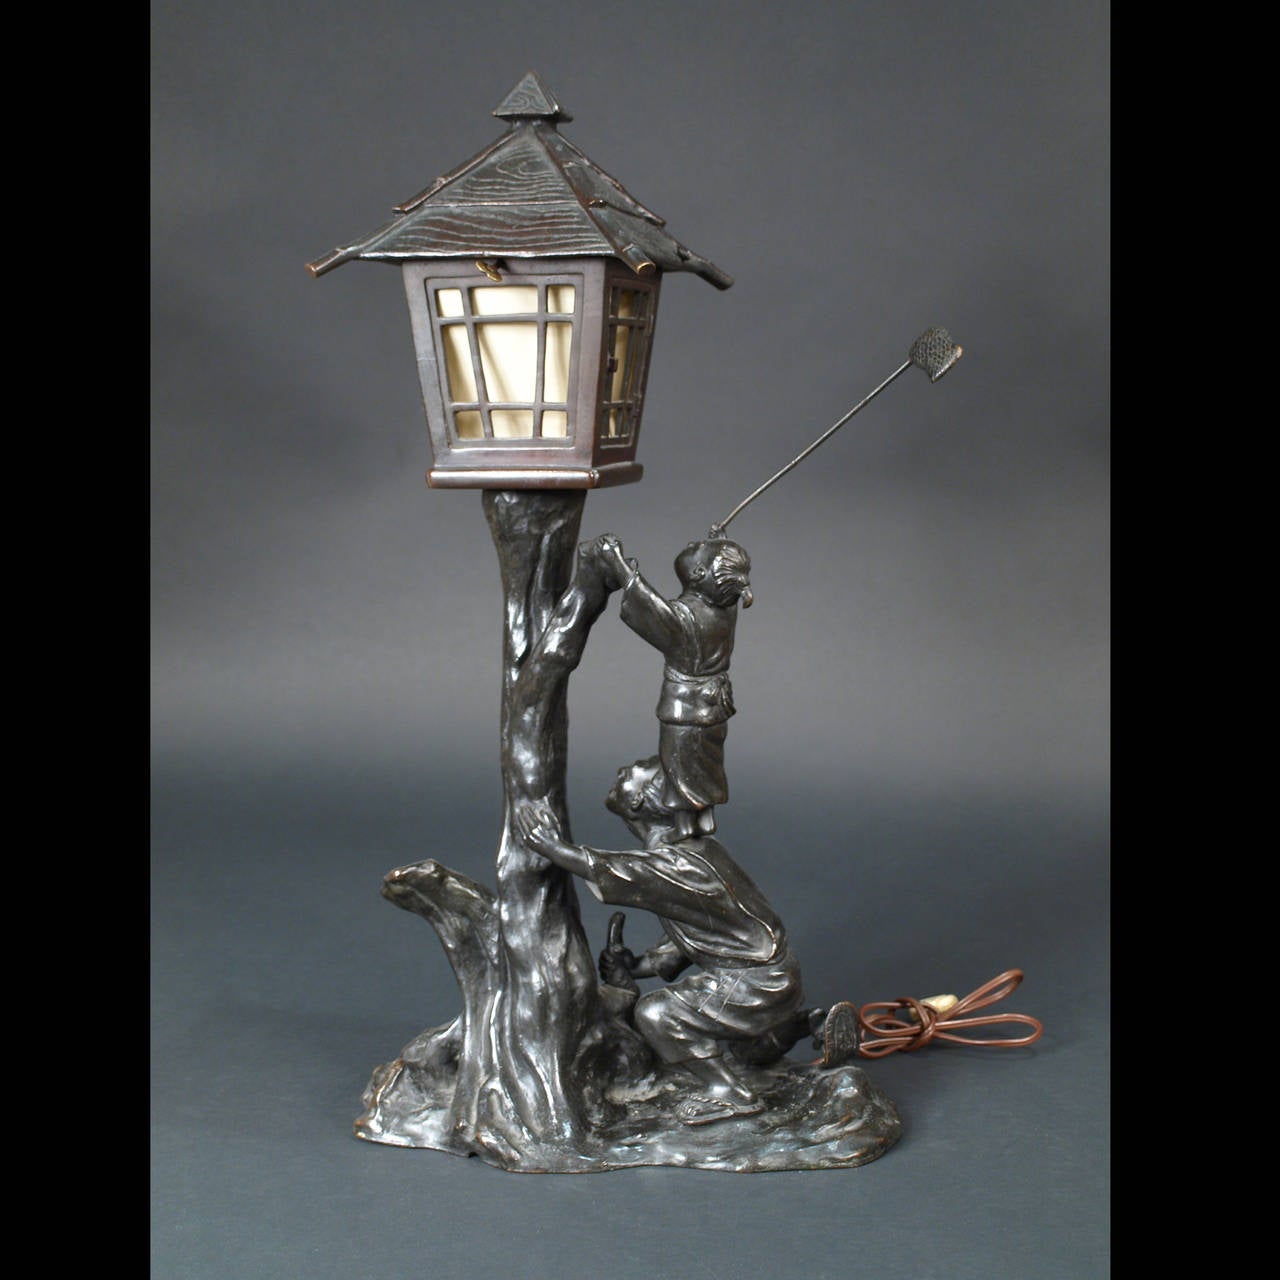 This is a very original bronze lamp representing a little boy trying to catch a bird.
Japan, early 20th century.